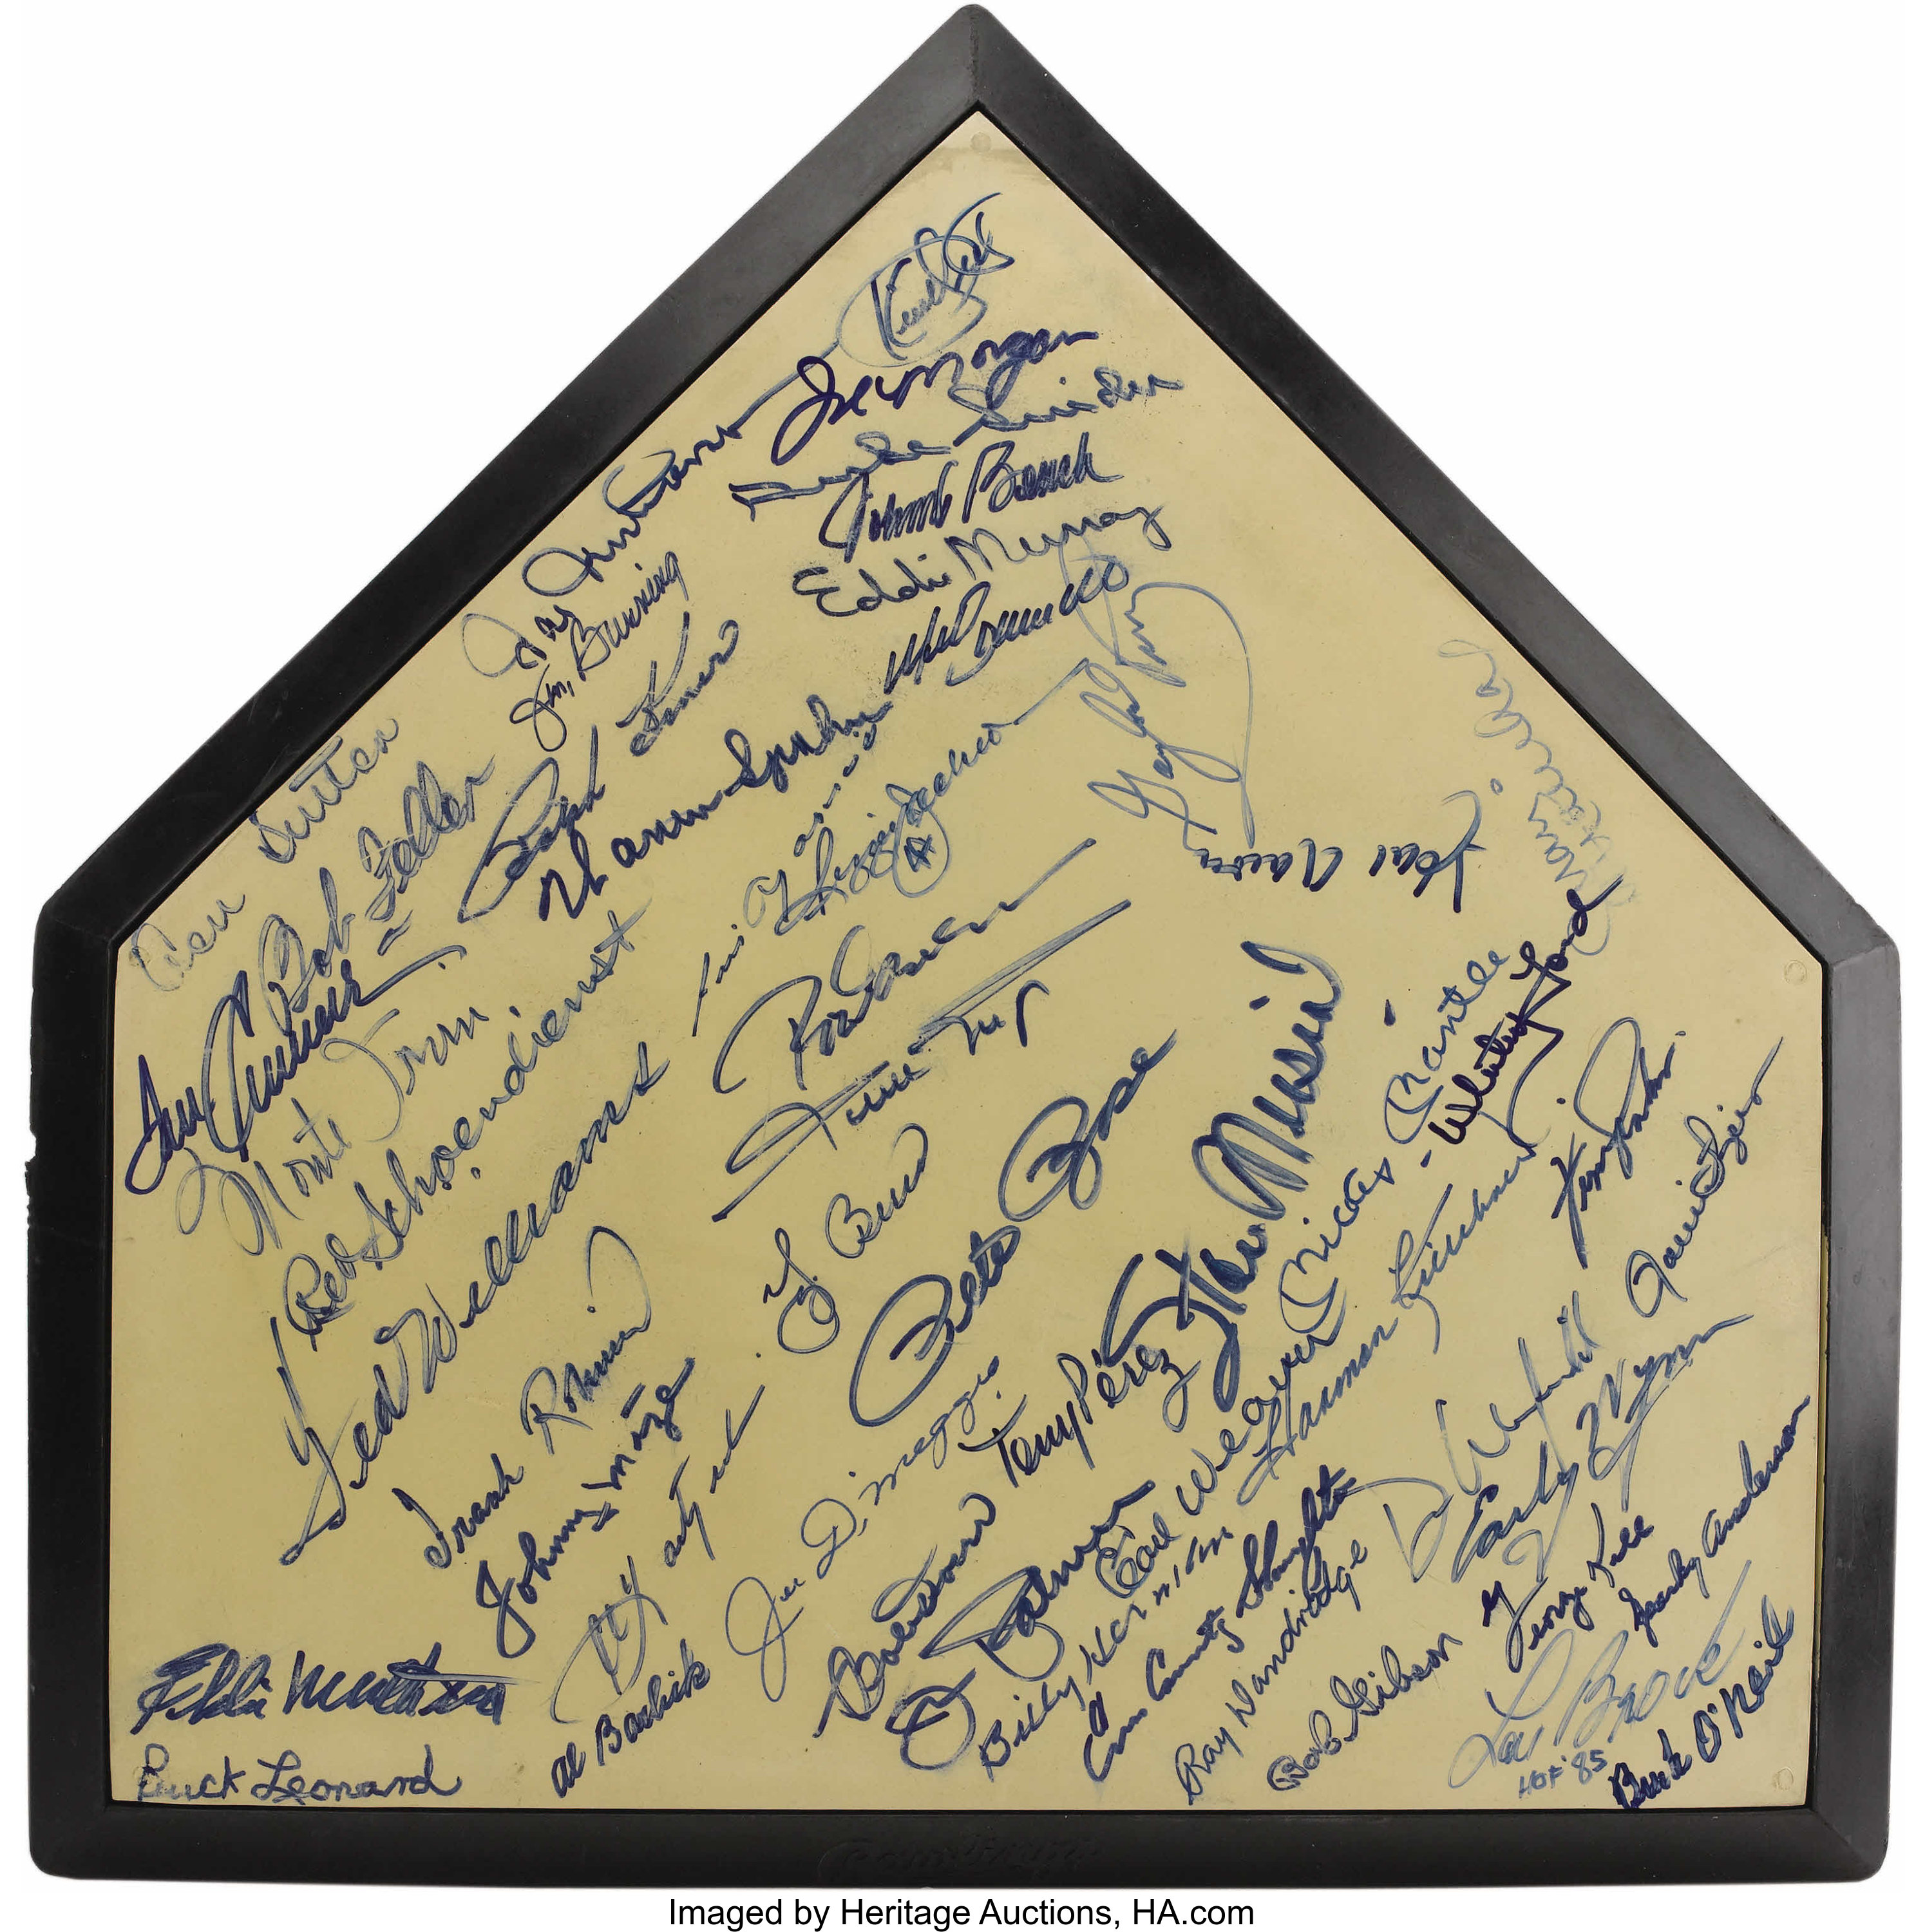 1980 S Hall Of Famers Stars Multi Signed Home Plate Exceptional Lot 19227 Heritage Auctions